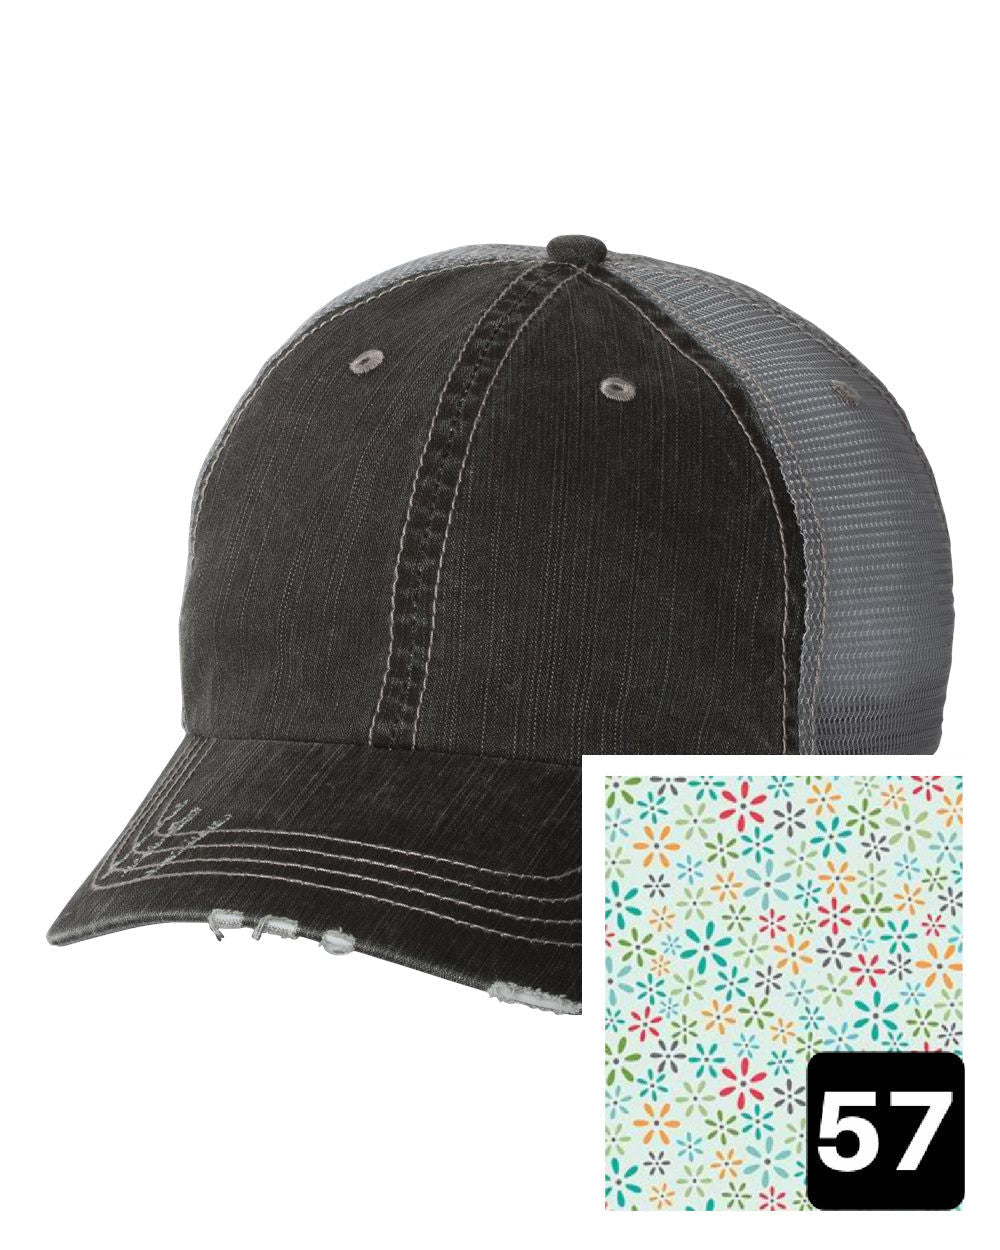 gray distressed trucker hat with white daisy on yellow fabric state of Maryland